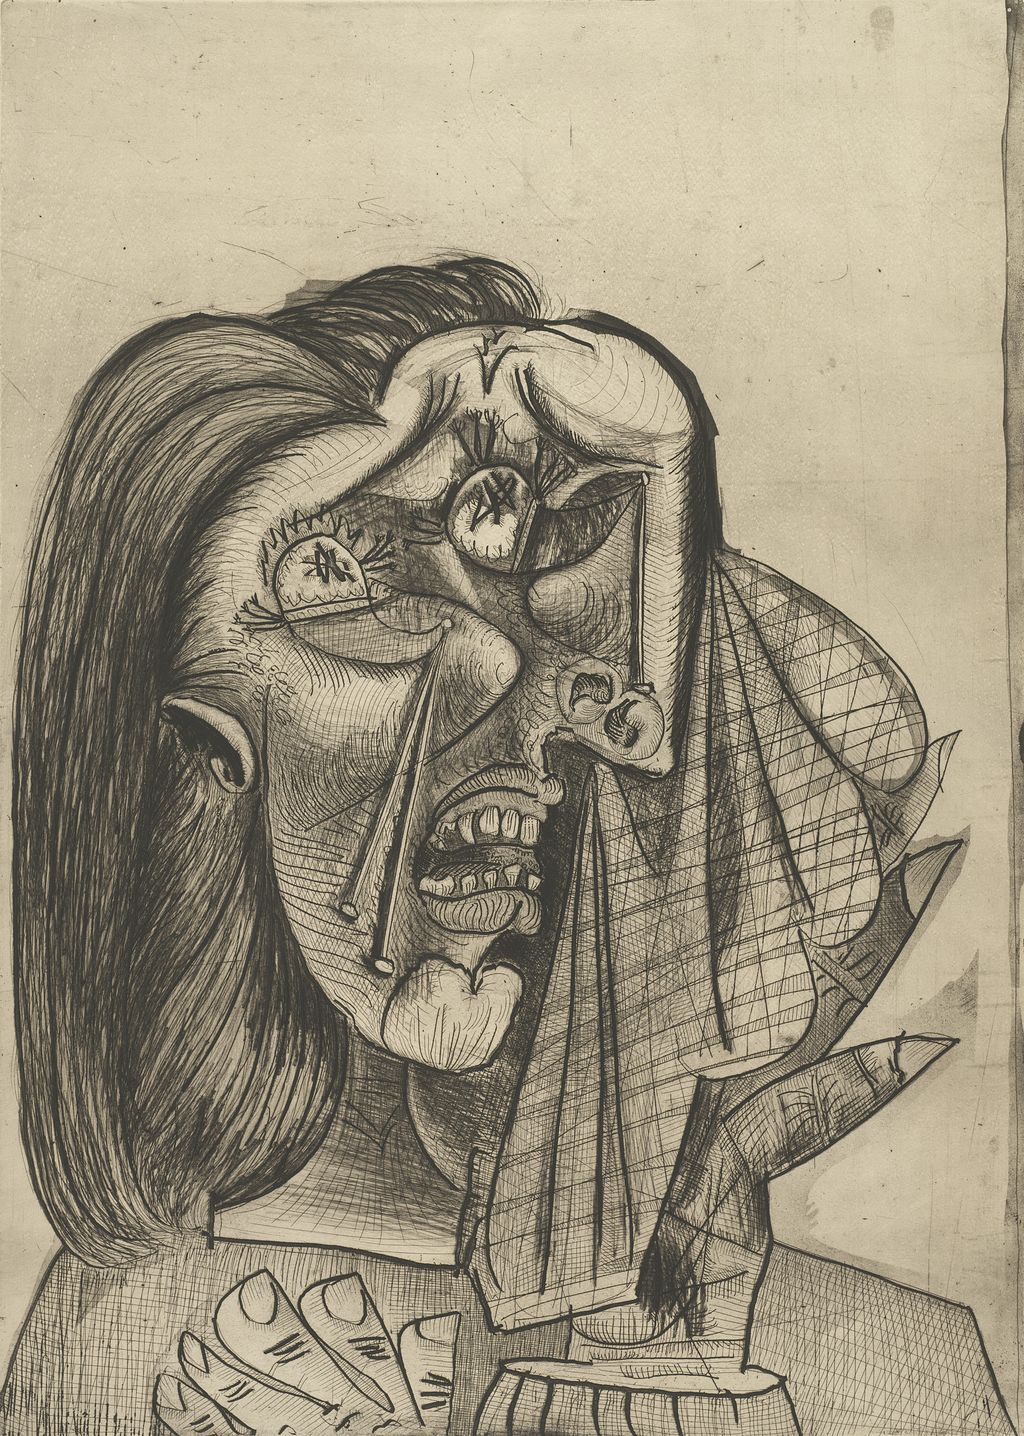 Pablo Picasso. Weeping Woman I, 1937. The Art Institute of Chicago, through prior acquisition of the Martin A. Ryerson Collection with the assistance of the Noel and Florence Rothman Family and the Margaret Fisher Endowment. © 2013 Estate of Pablo Picasso / Artists Rights Society (ARS), New York.